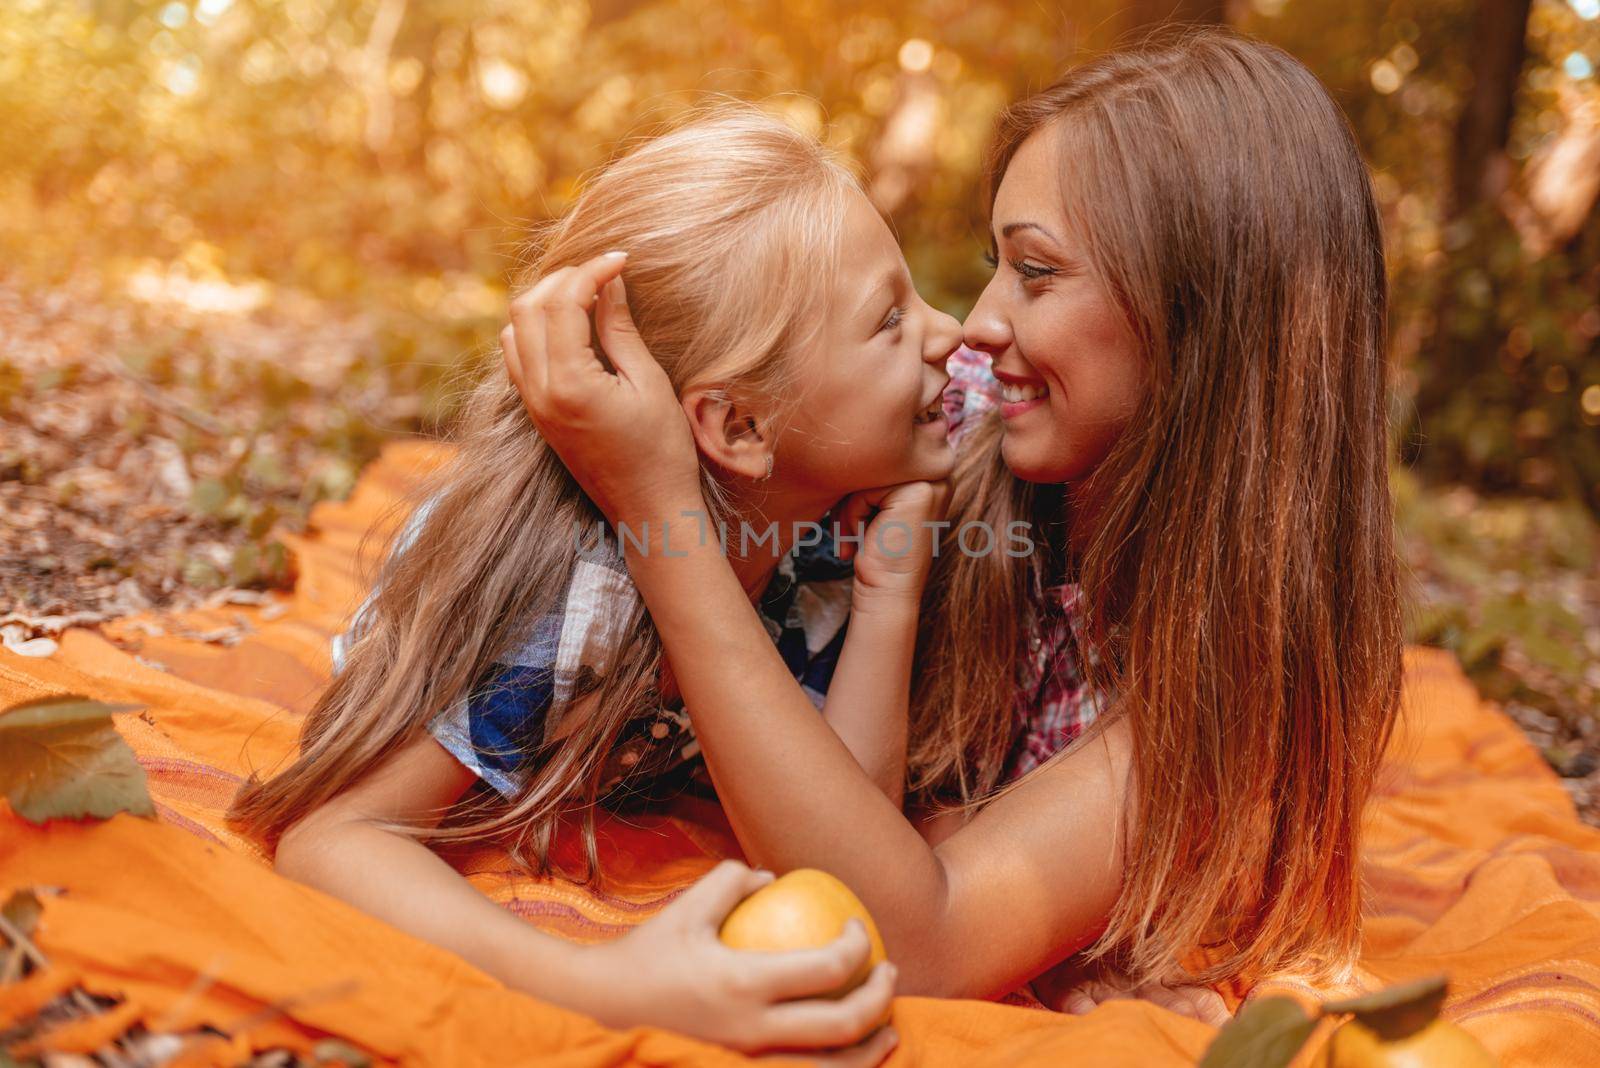 It's the autumn season and beautiful mom and her little girl is lying down in a forest full of autumn leaves and enjoying. 